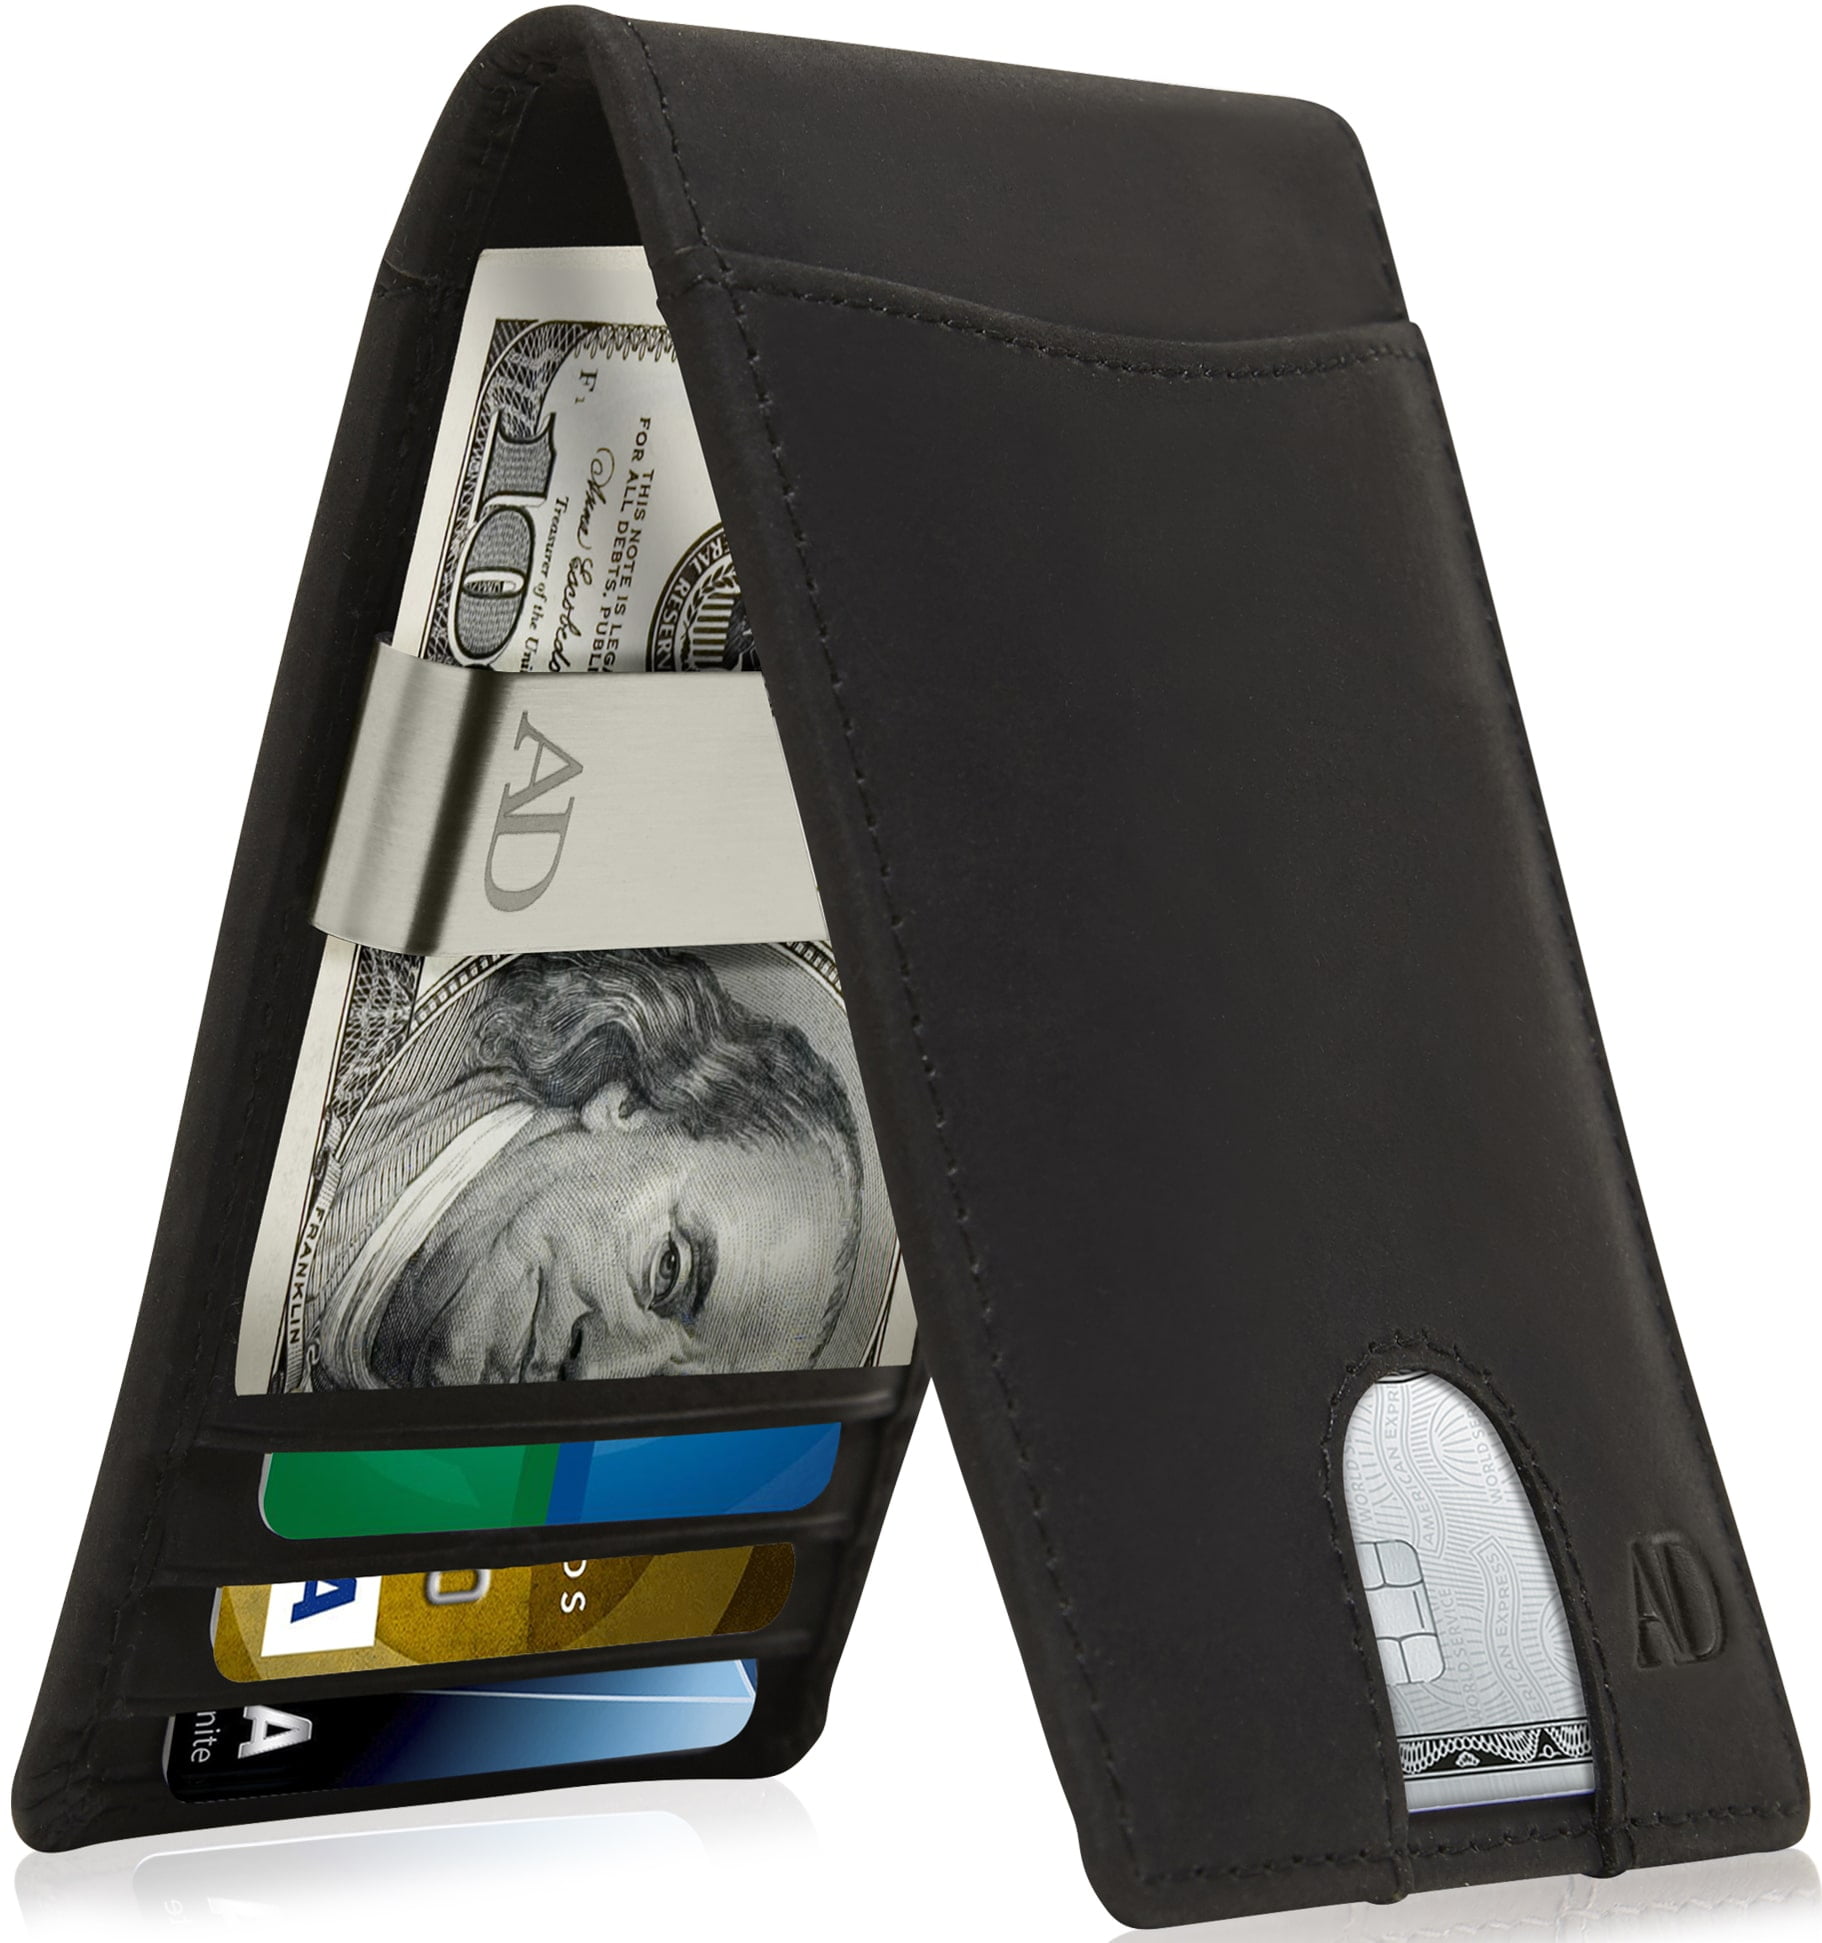 Bags & Purses Wallets & Money Clips Chain Wallets Cork Wallet Crossbody with Mobile Phone Compartment RFID Blocker 